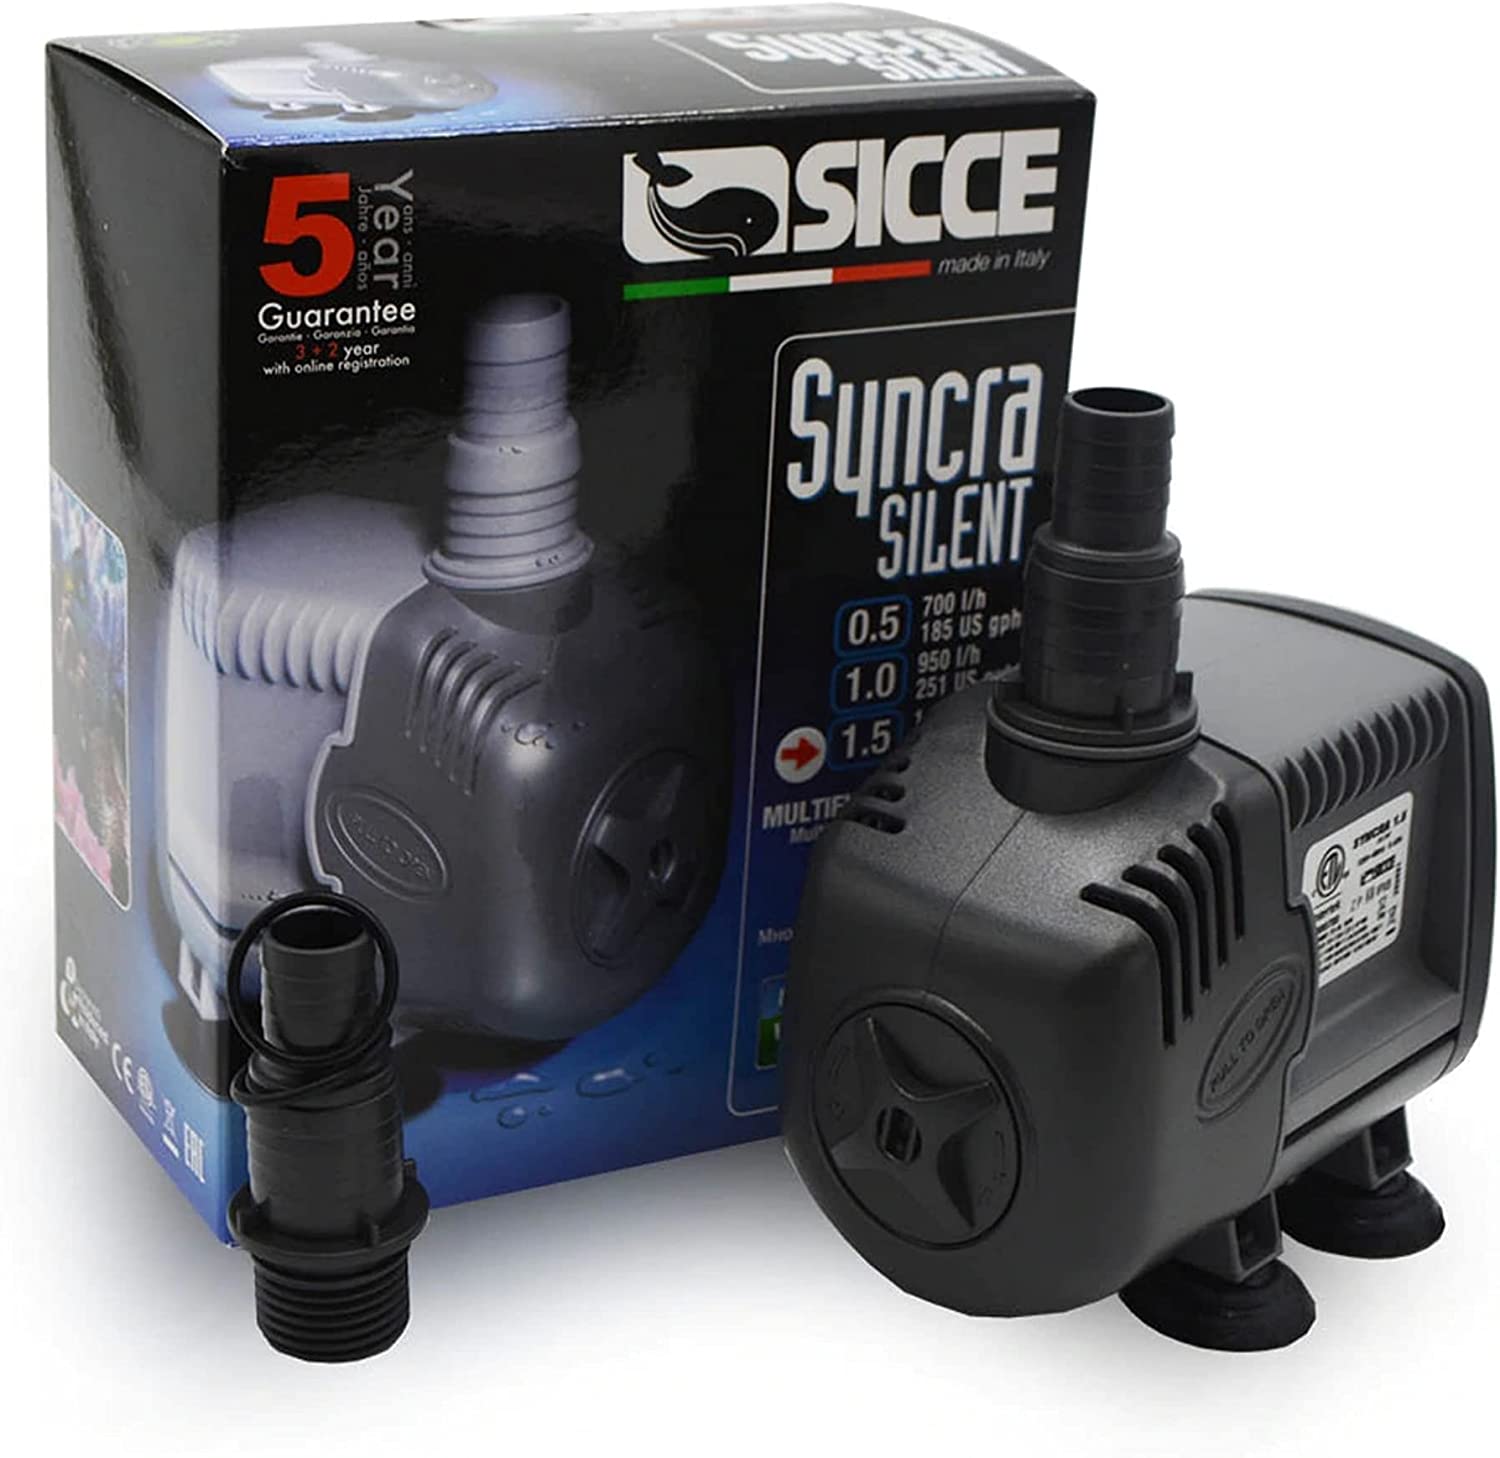 Sicce Syncra Silent Multi-Purpose Pump, Designed for Freshwater and Saltwater